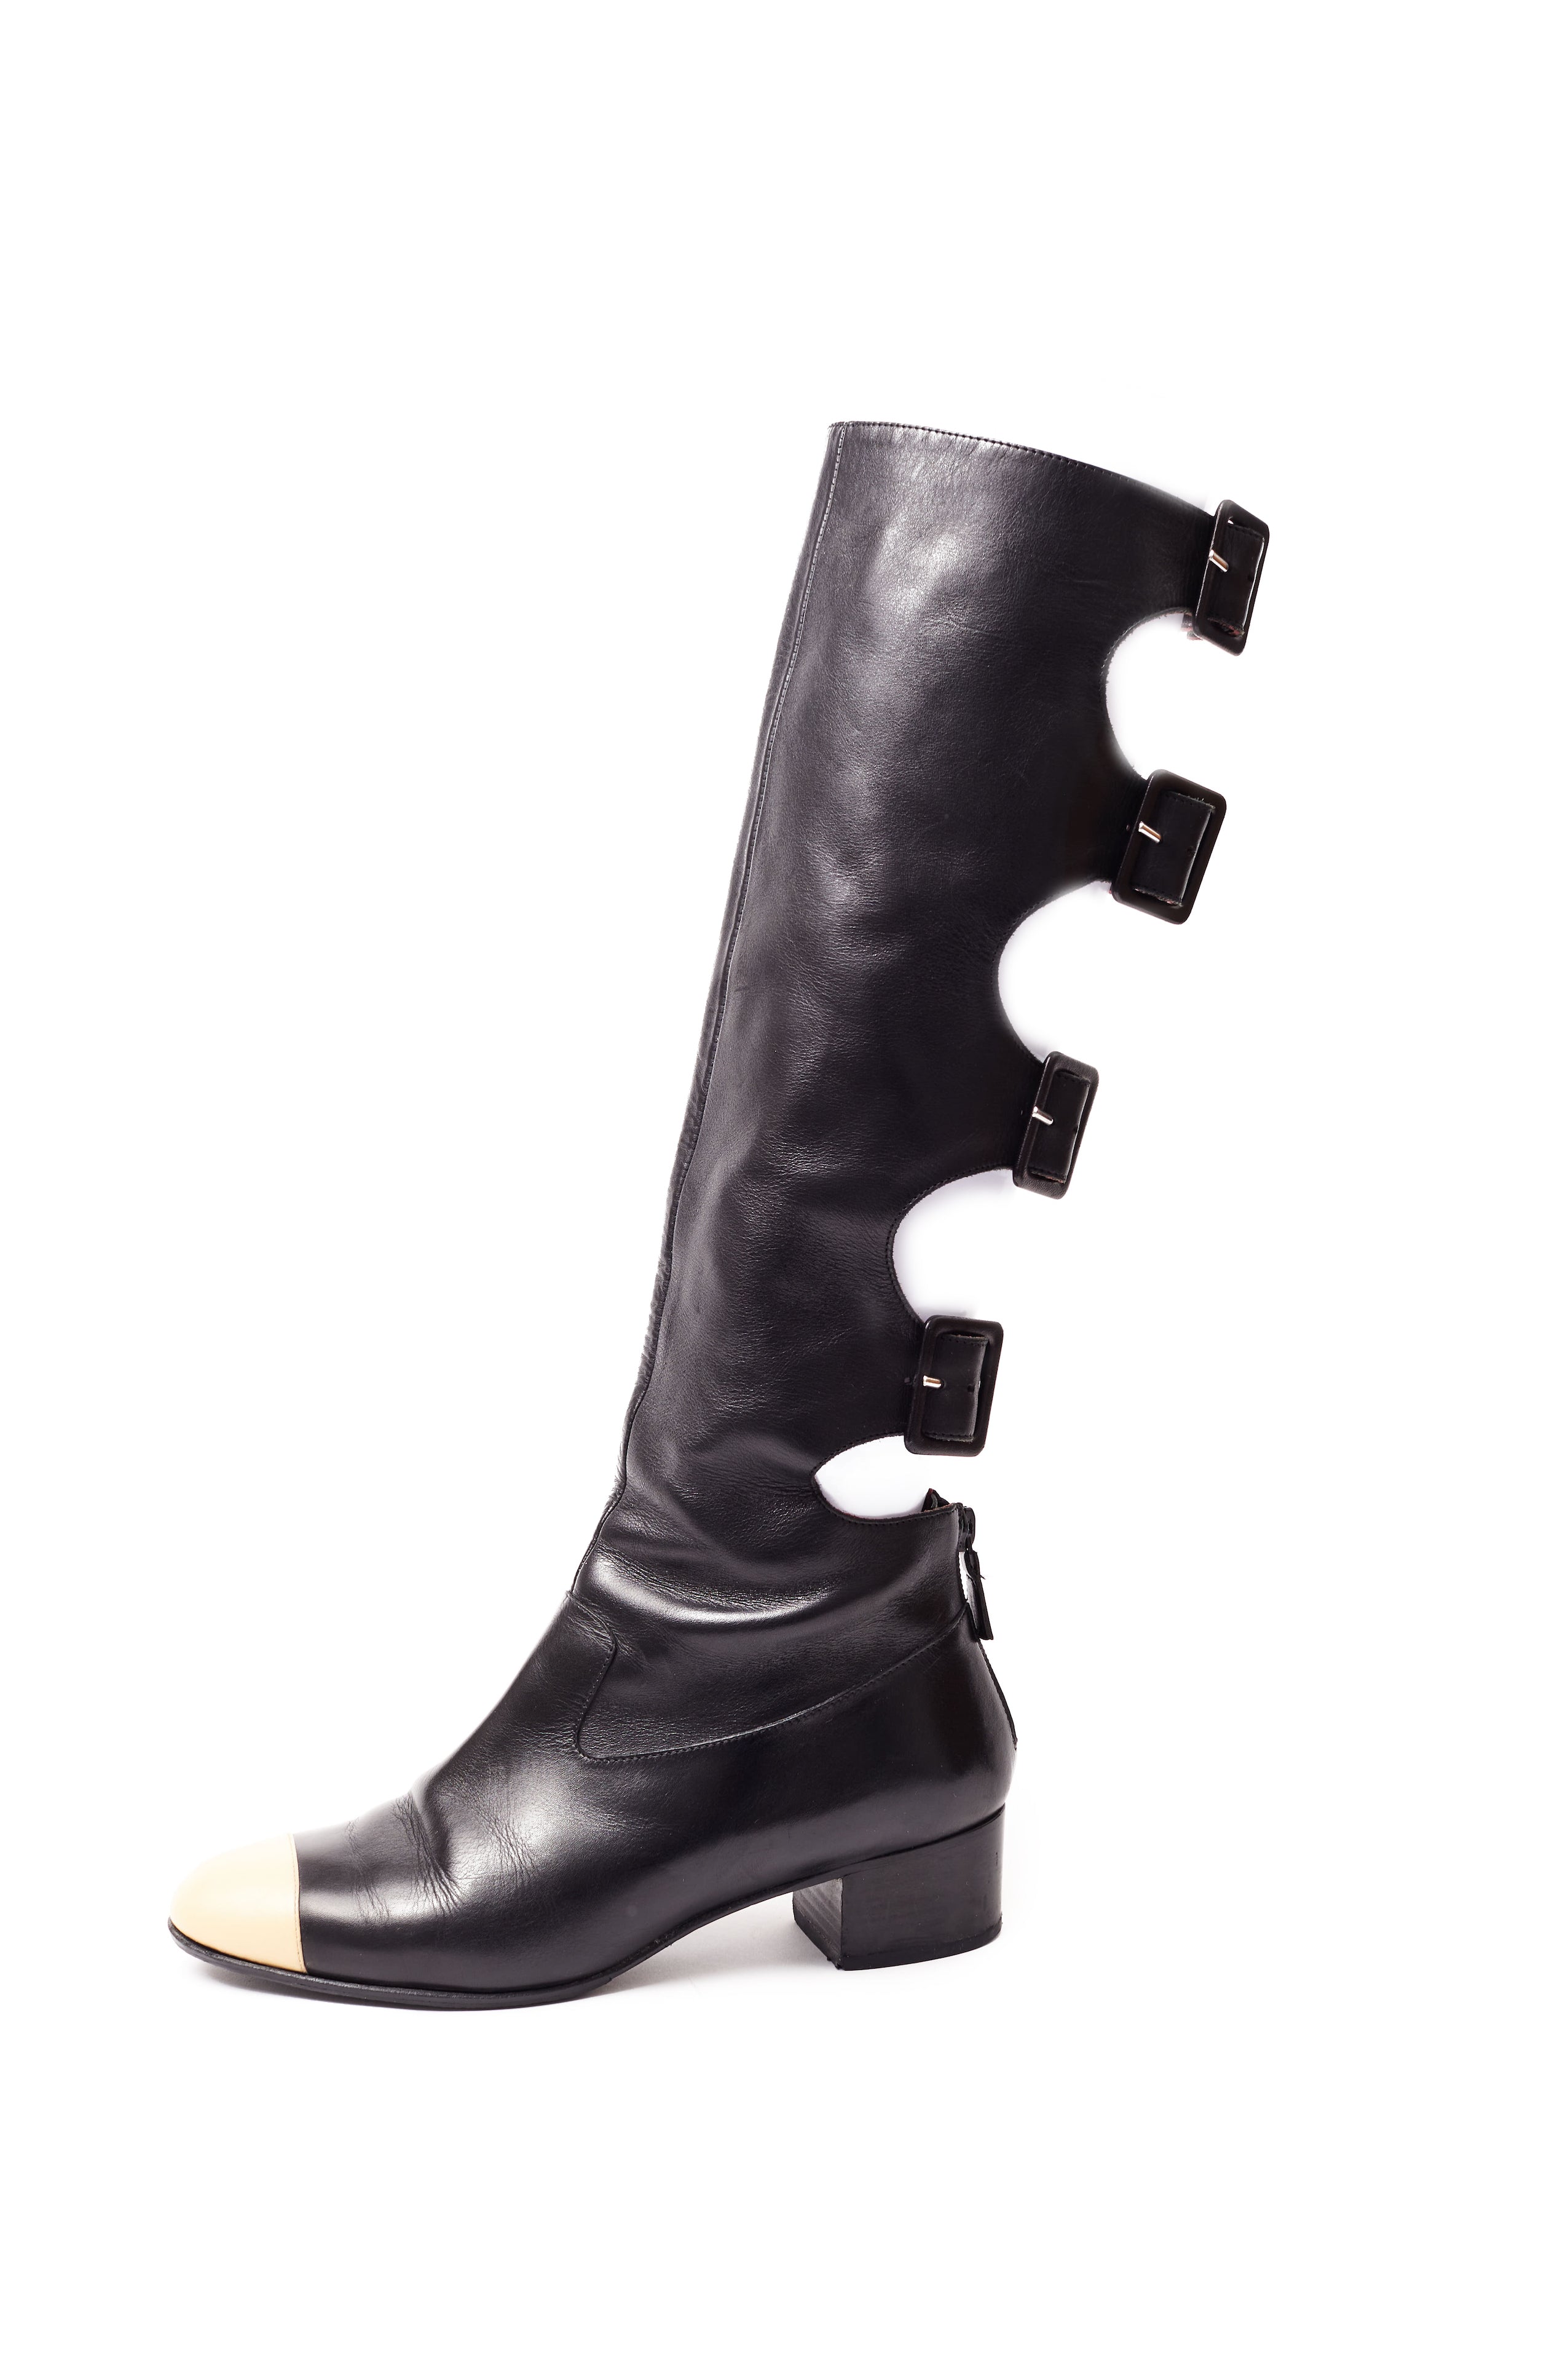 Chanel <br> F/W 2007 runway cut-out leather boots